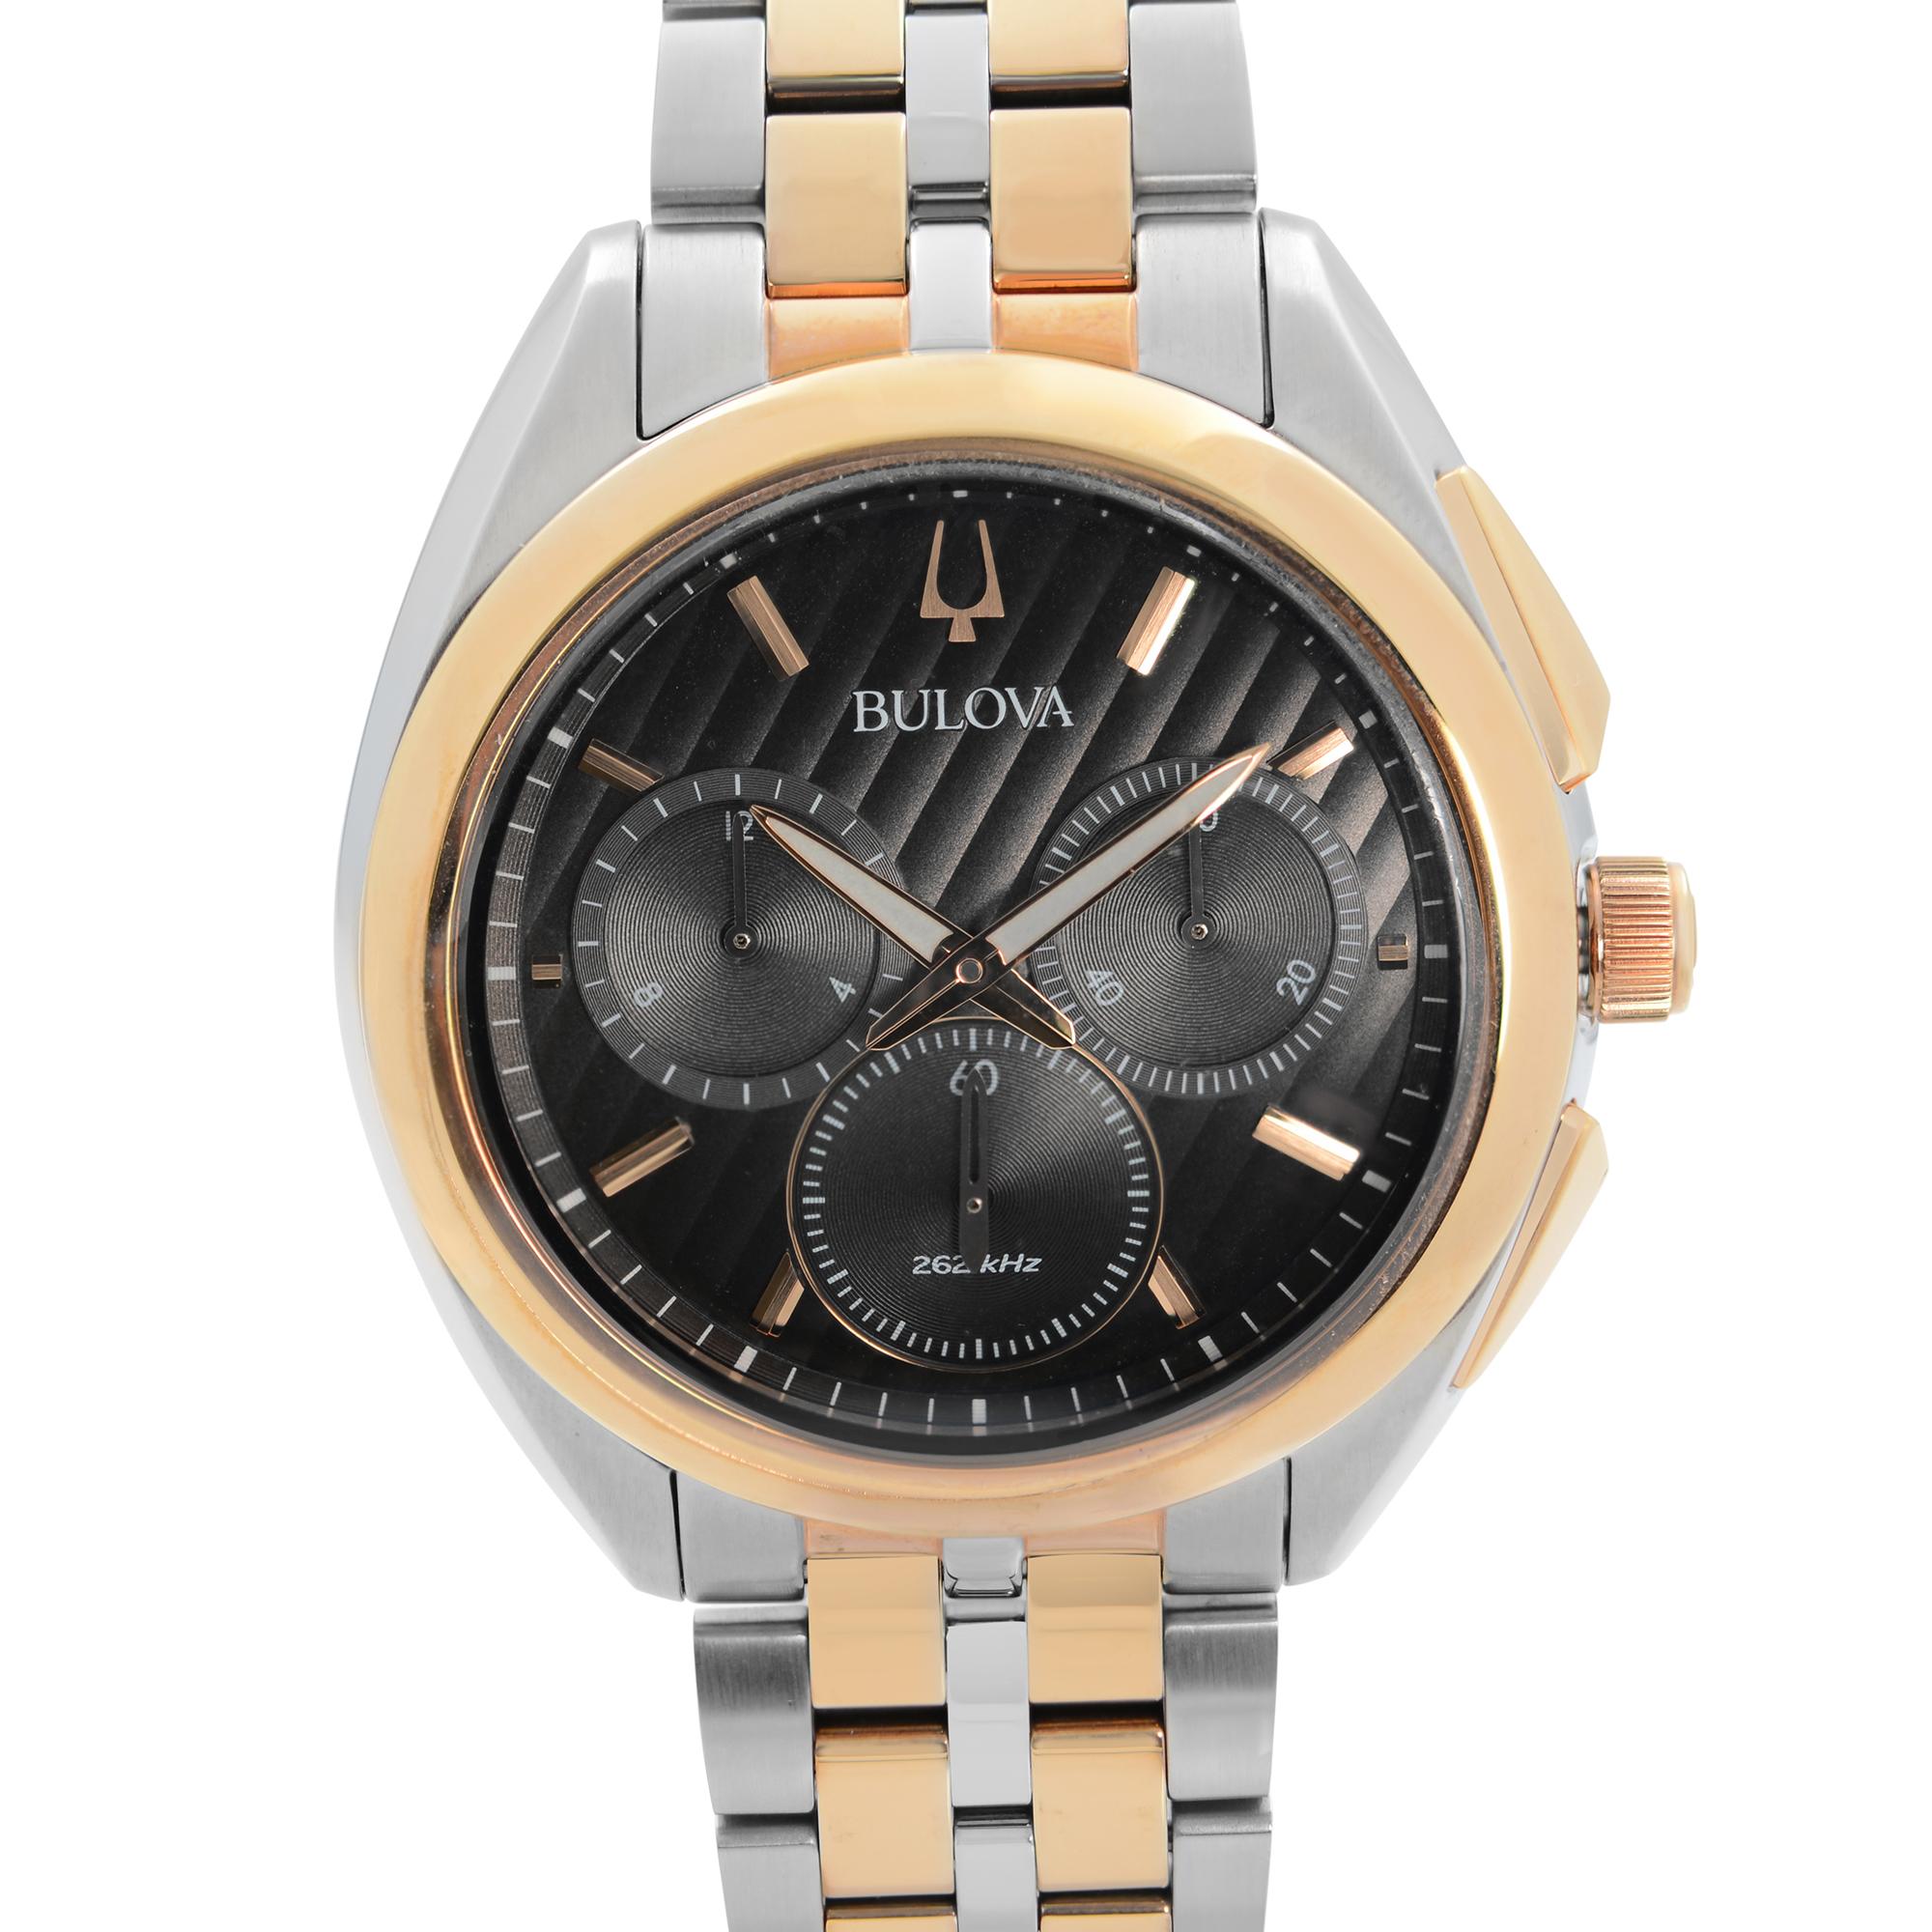 Excellent Condition. The Watch Only Has Hairline Scratches on Gold-Tone Parts Due To Store Handling. This Beautiful Timepiece Features: Two-Tone Stainless Steel Case and Bracelet, Fixed Stainless Steel Bezel, Black Dial with Luminous Gold-Tone